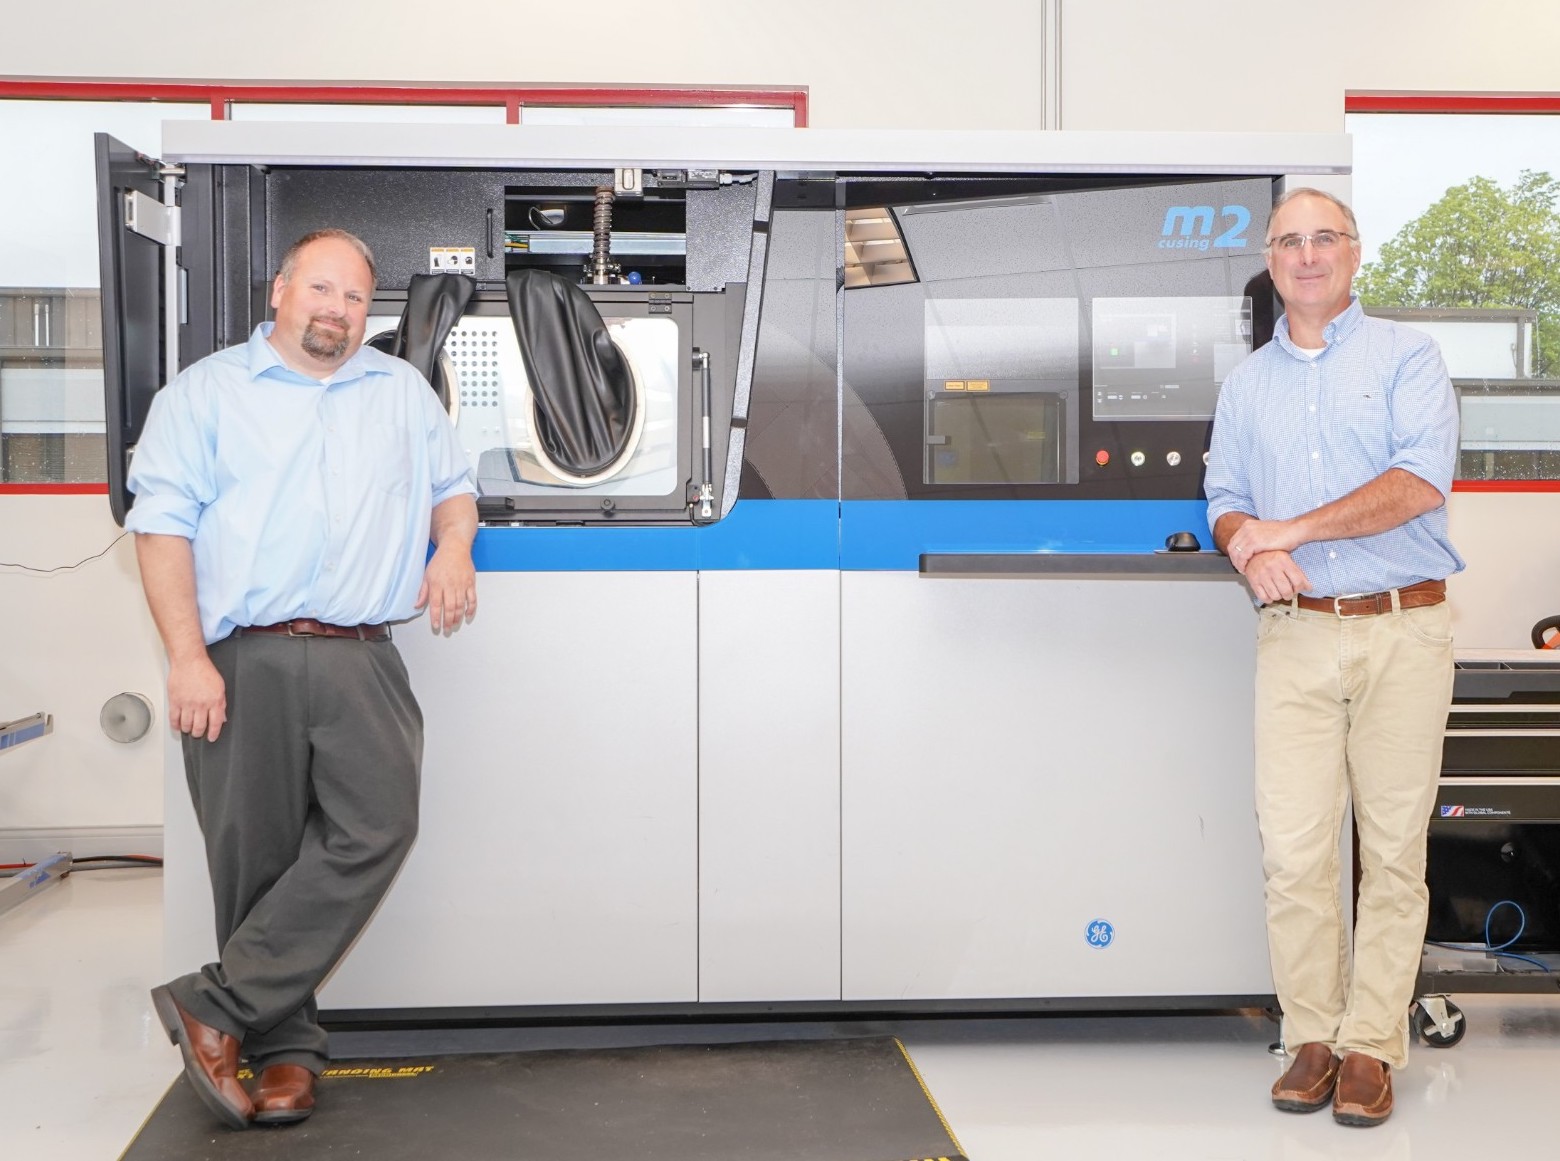 Morris and Rengers (pictured), have started a new company following the acquisition of Morris Technologies. Photo via the EIN press wire.